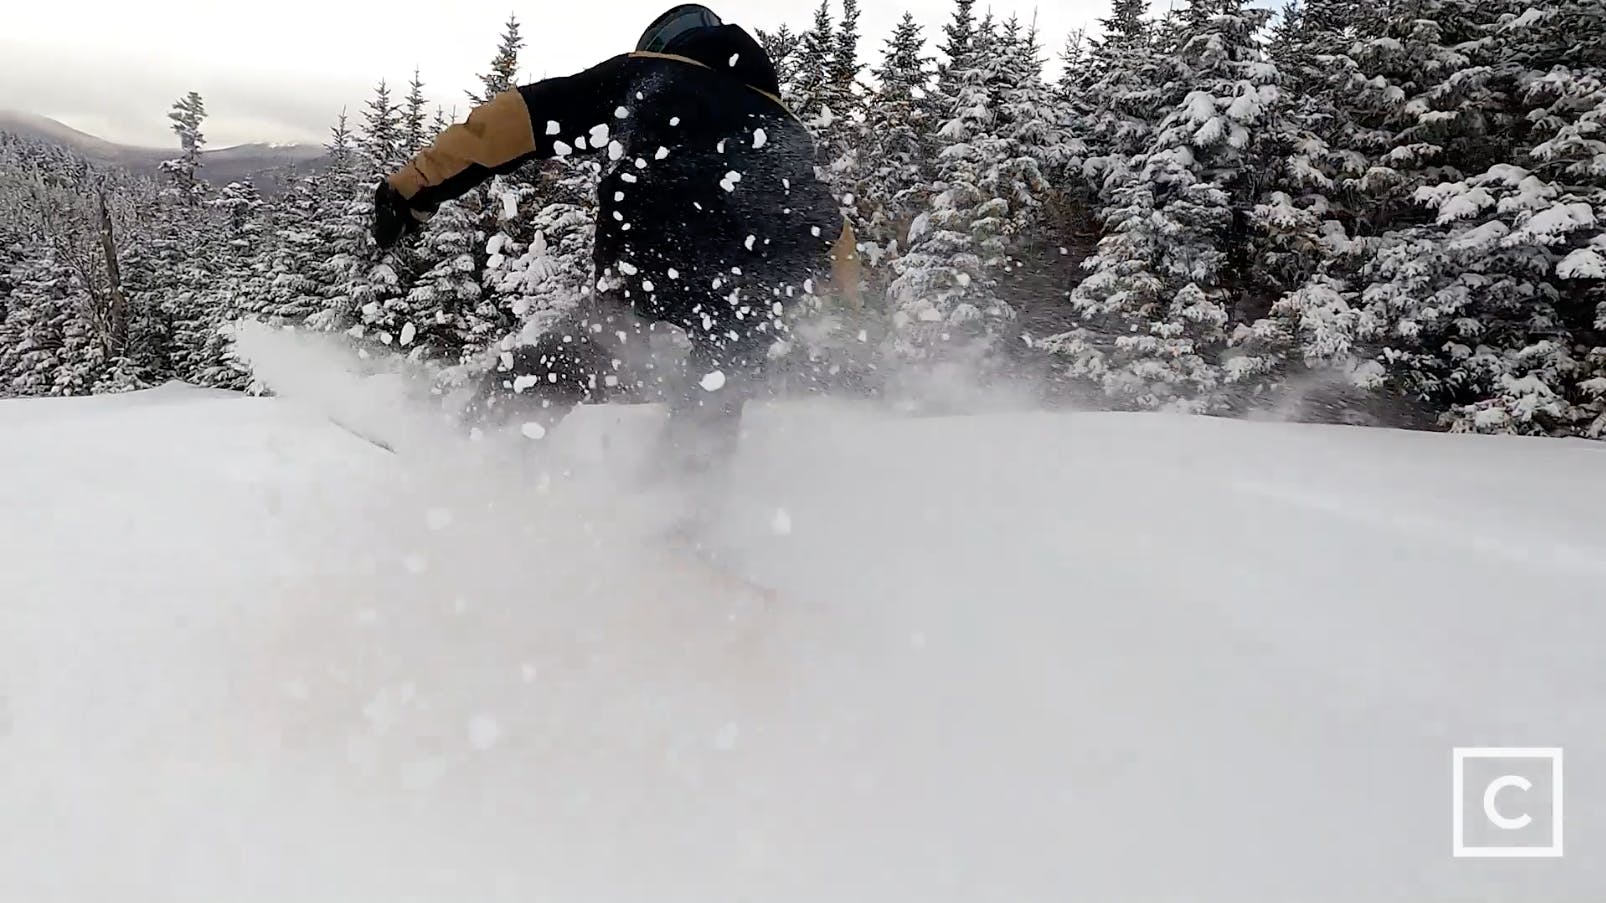 Curated expert Colby Henderson kicking up a spray of powder as he launches into a jump on his snowboard